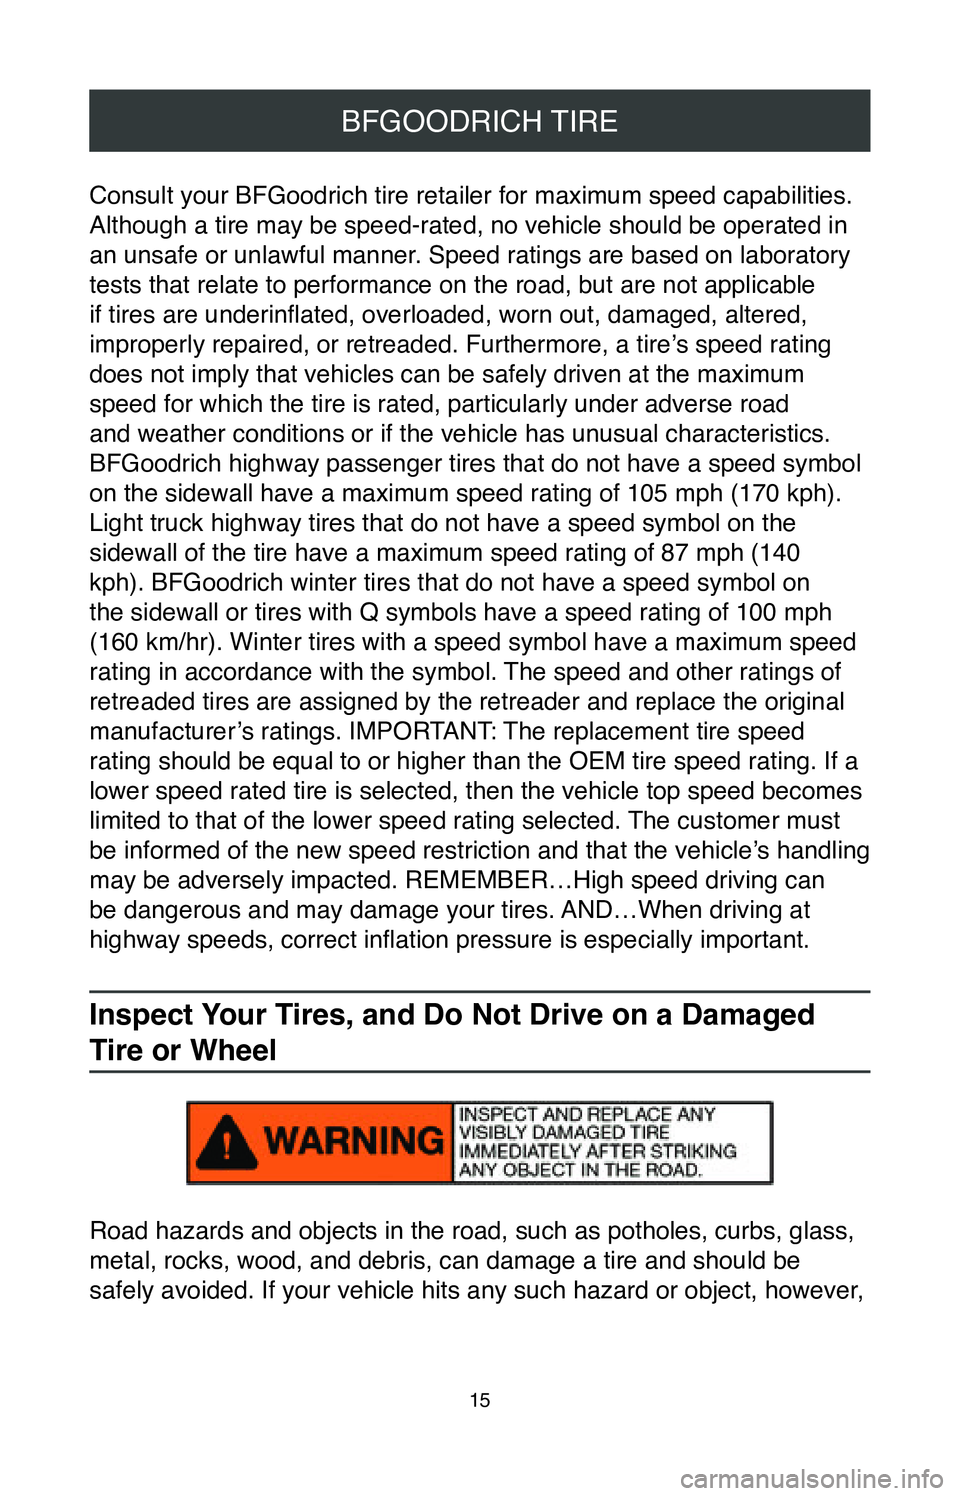 TOYOTA TUNDRA 2020  Warranties & Maintenance Guides (in English) 15
BFGOODRICH TIRE
Consult your BFGoodrich tire retailer for maximum speed capabilities. 
Although a tire may be speed-rated, no vehicle should be operated in 
an unsafe or unlawful manner. Speed rati